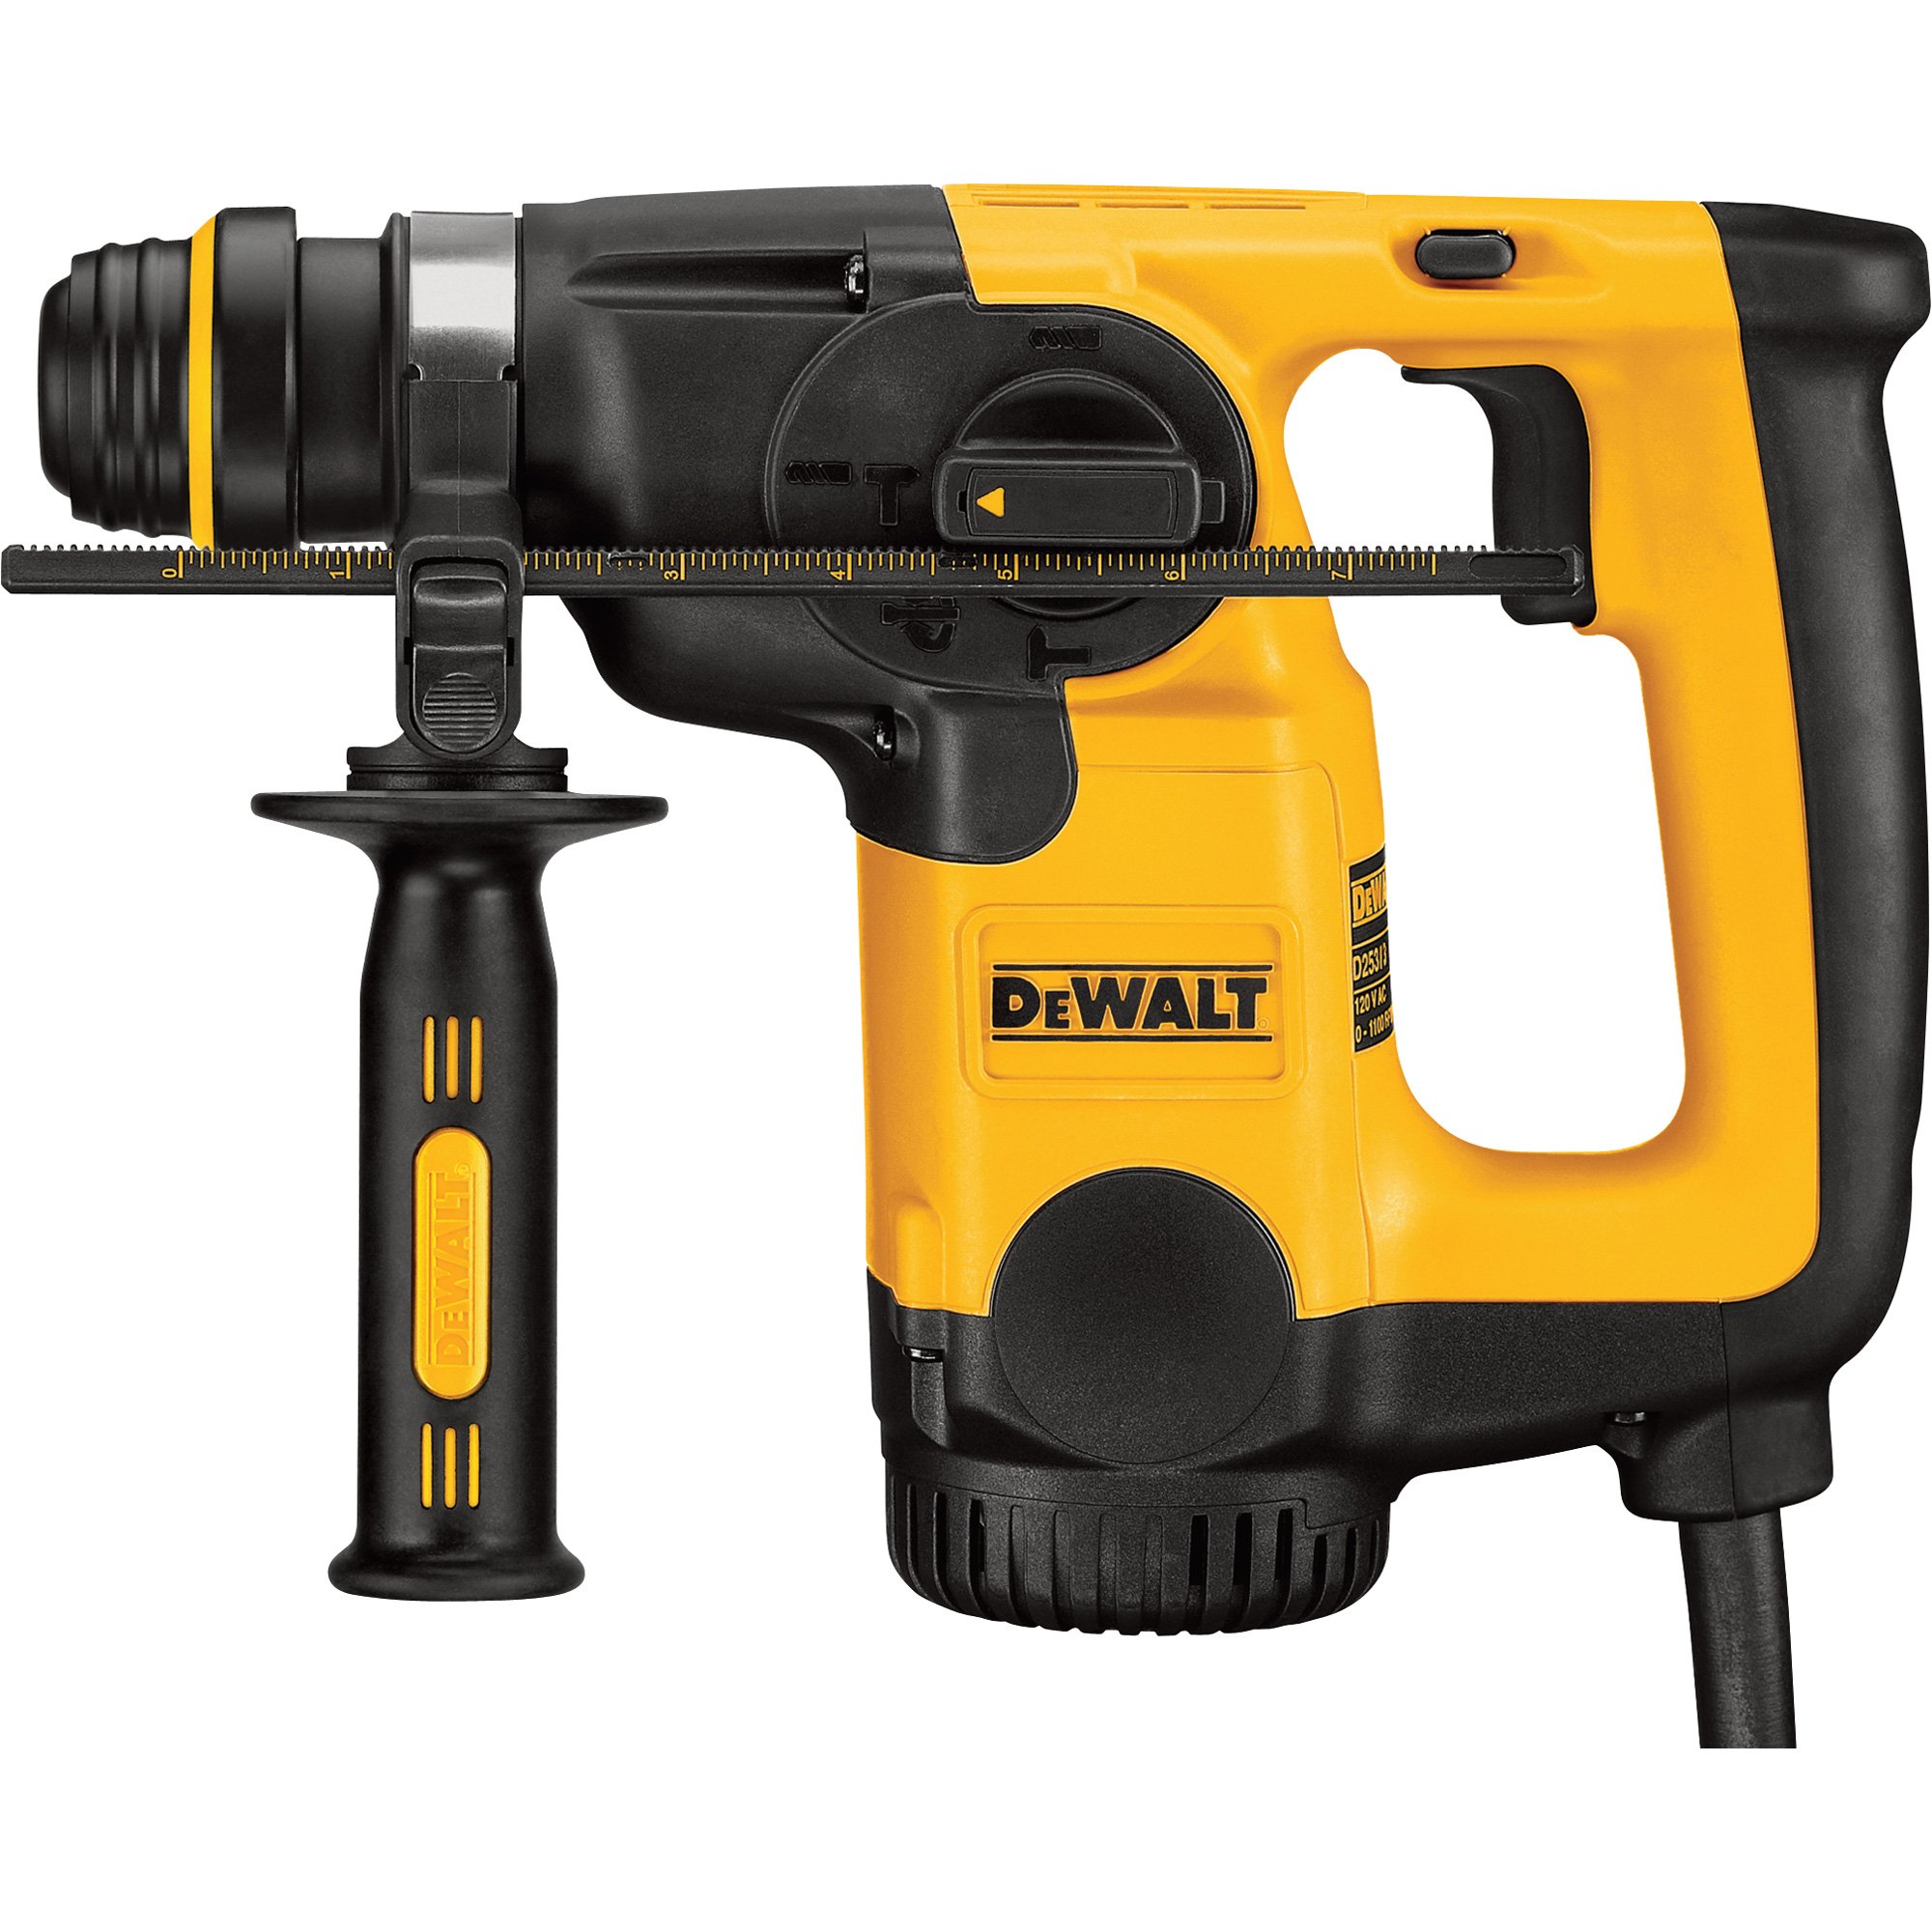 FREE SHIPPING — DEWALT Heavy-Duty L-Shape Corded SDS Rotary Hammer — 1in.,  2.5 Ft.-Lbs., 8.0 Amp, Model# D25313K Northern Tool